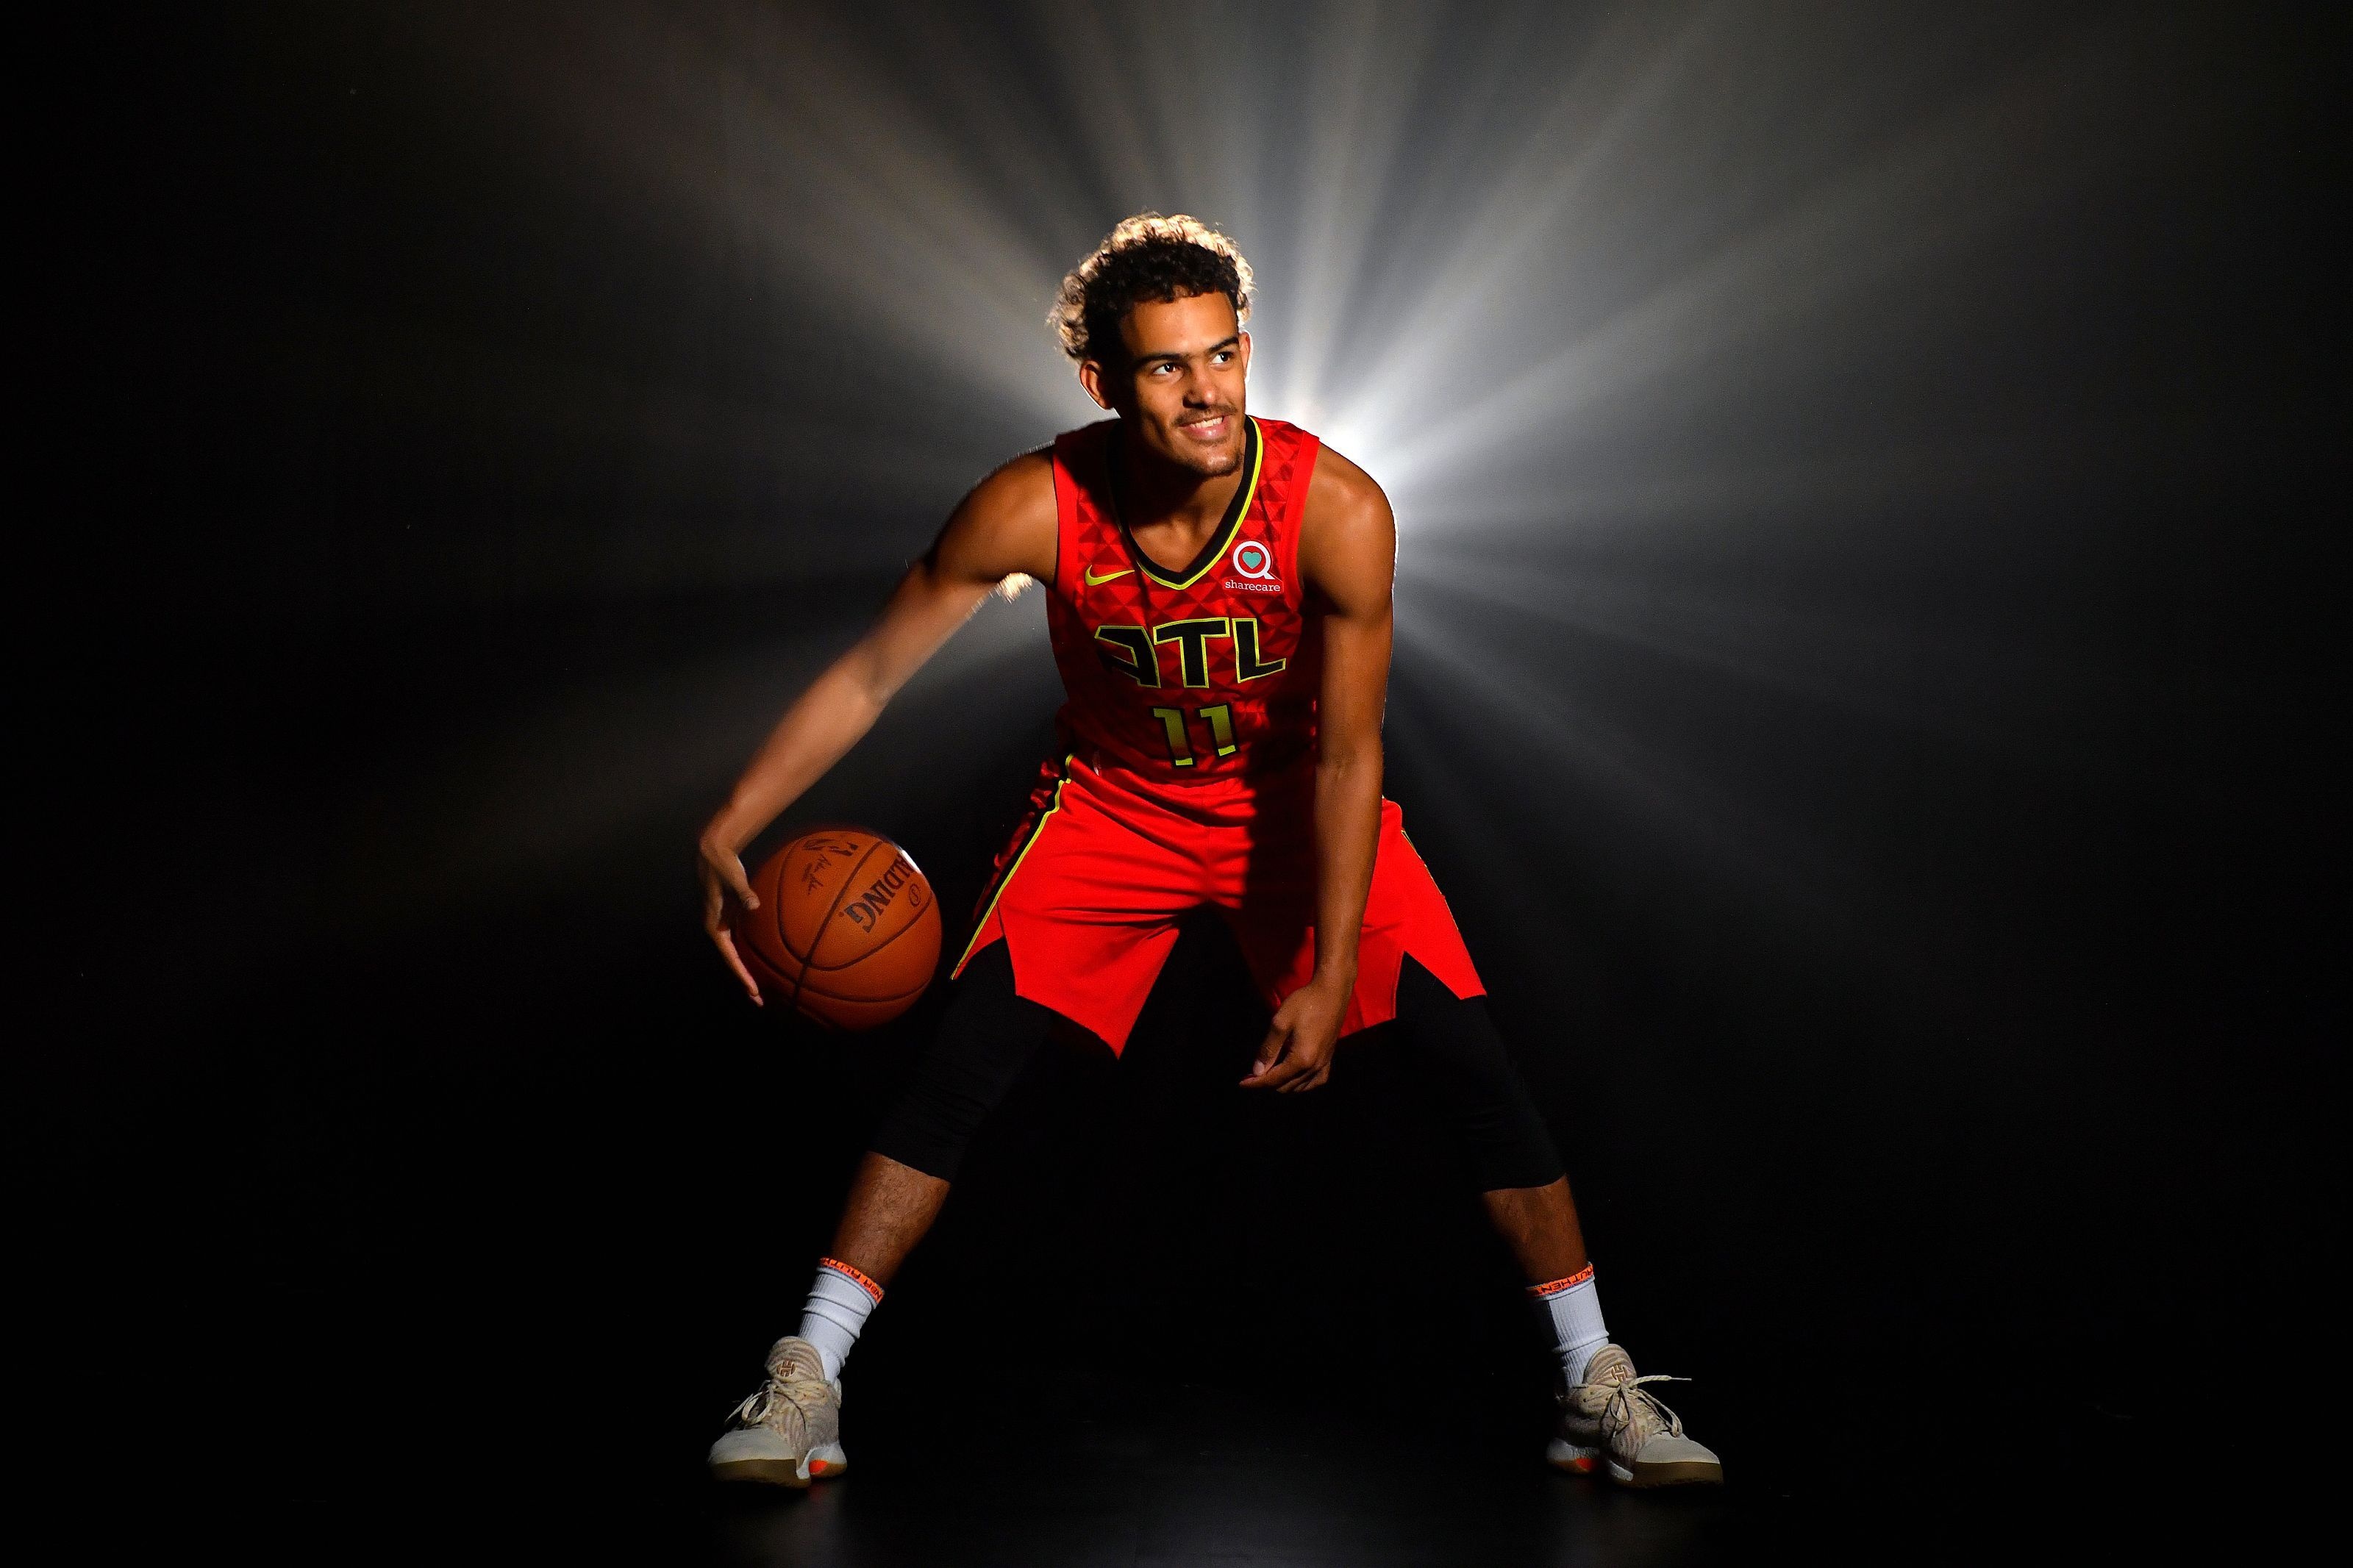 Trae Young, High-quality wallpapers, Stunning imagery, Professional athlete, 3200x2140 HD Desktop